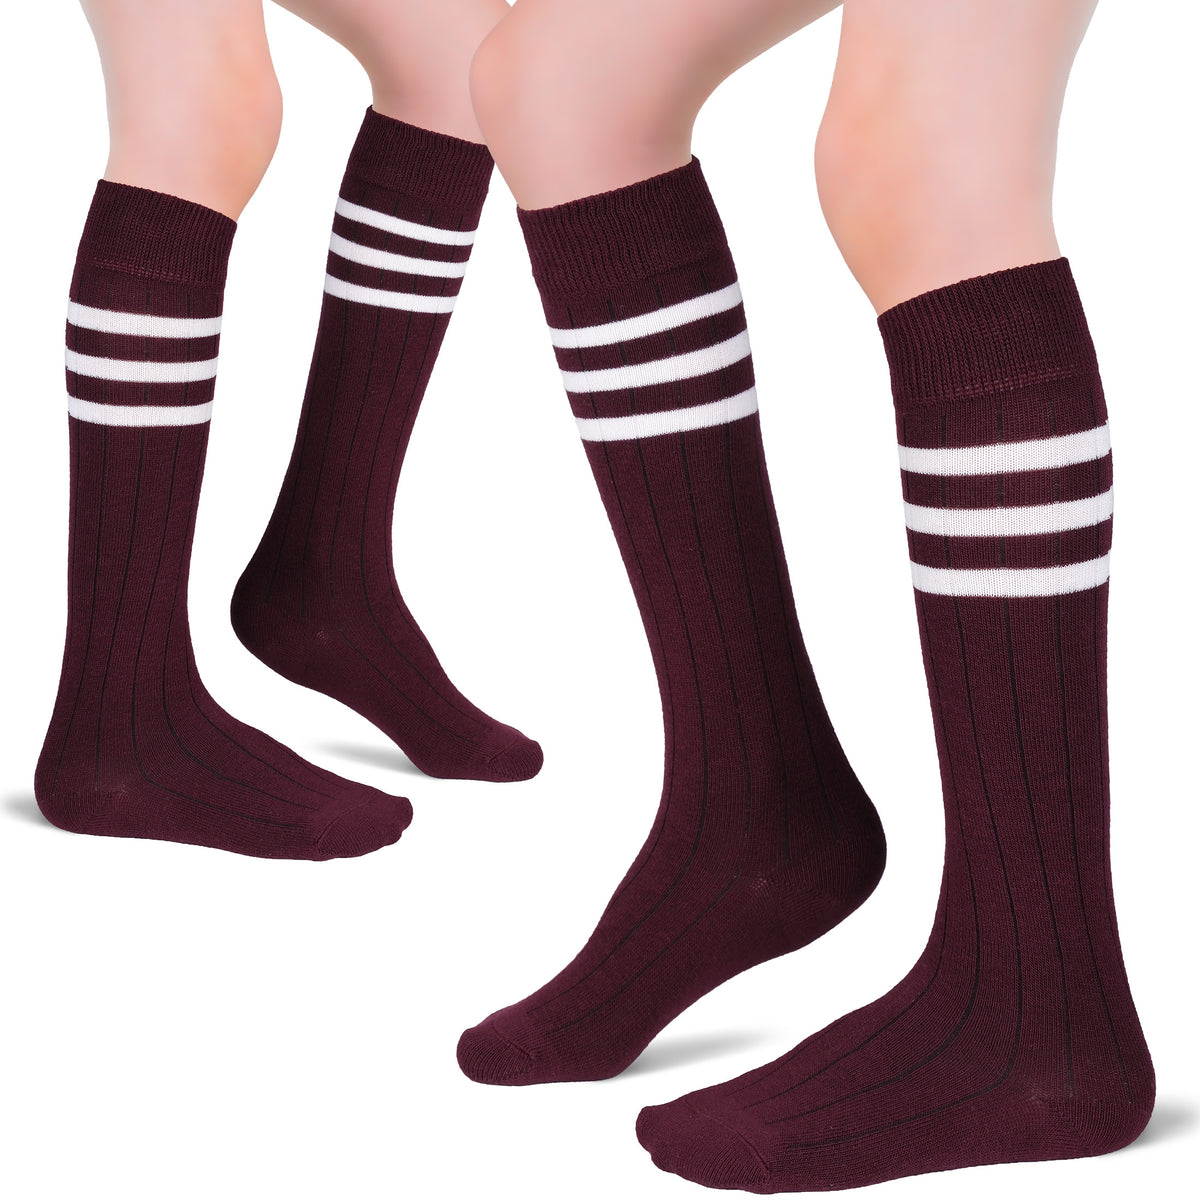 Elevate your sock game with these Cotton Kids' Knee-High Socks, showcasing two pairs of maroon socks with white stripes.